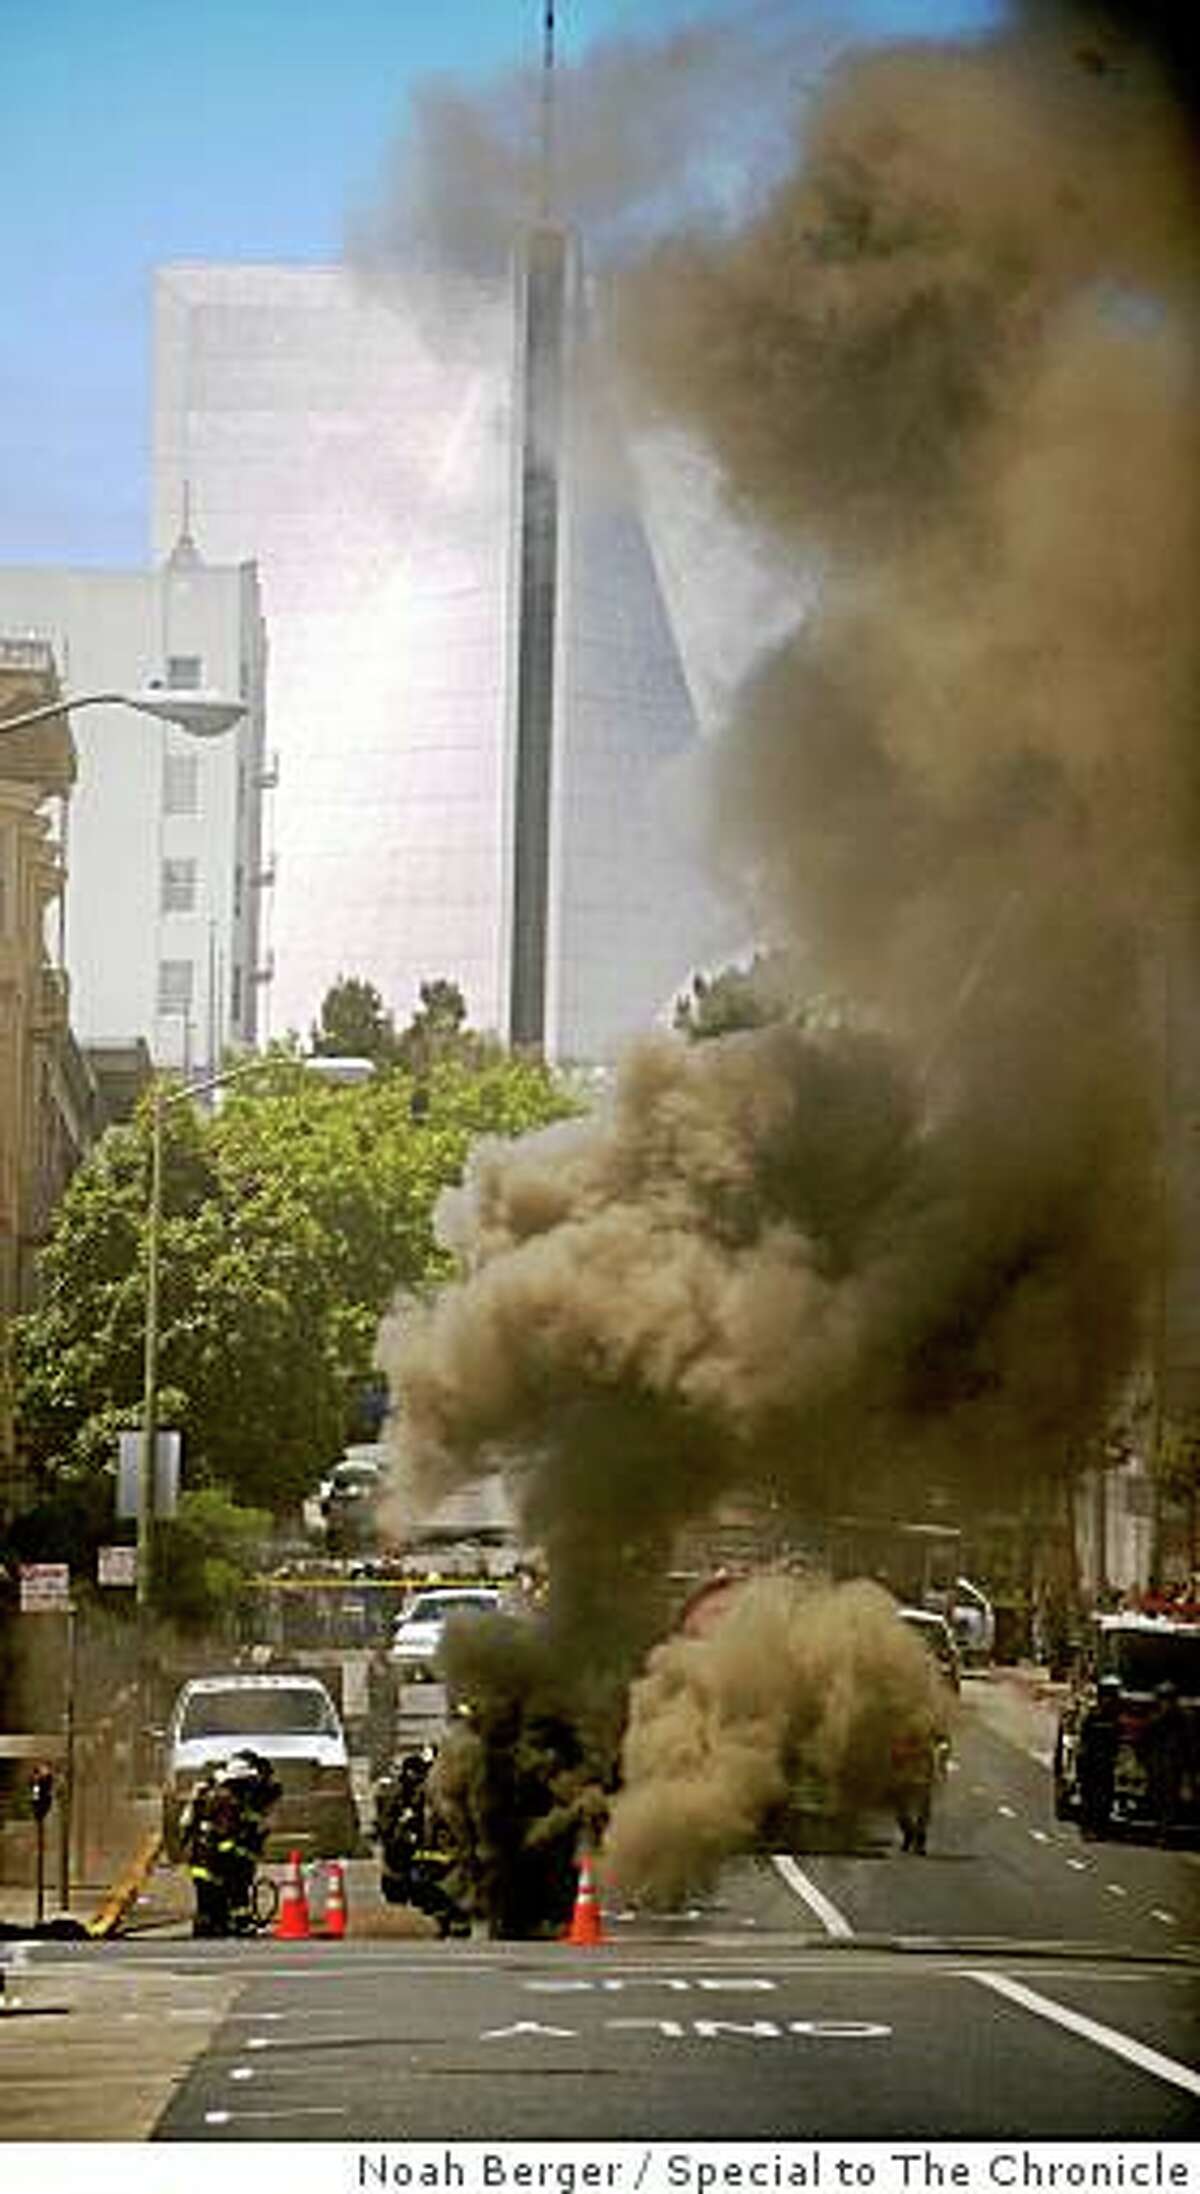 Firefighters fight an underground fire on O'Farrell Street in San Francisco on June 5, 2009. The underground explosion and fire in Tenderloin cut off power to 3,200 people, trapped some in elevators, and prompted a shelter-in-place order.